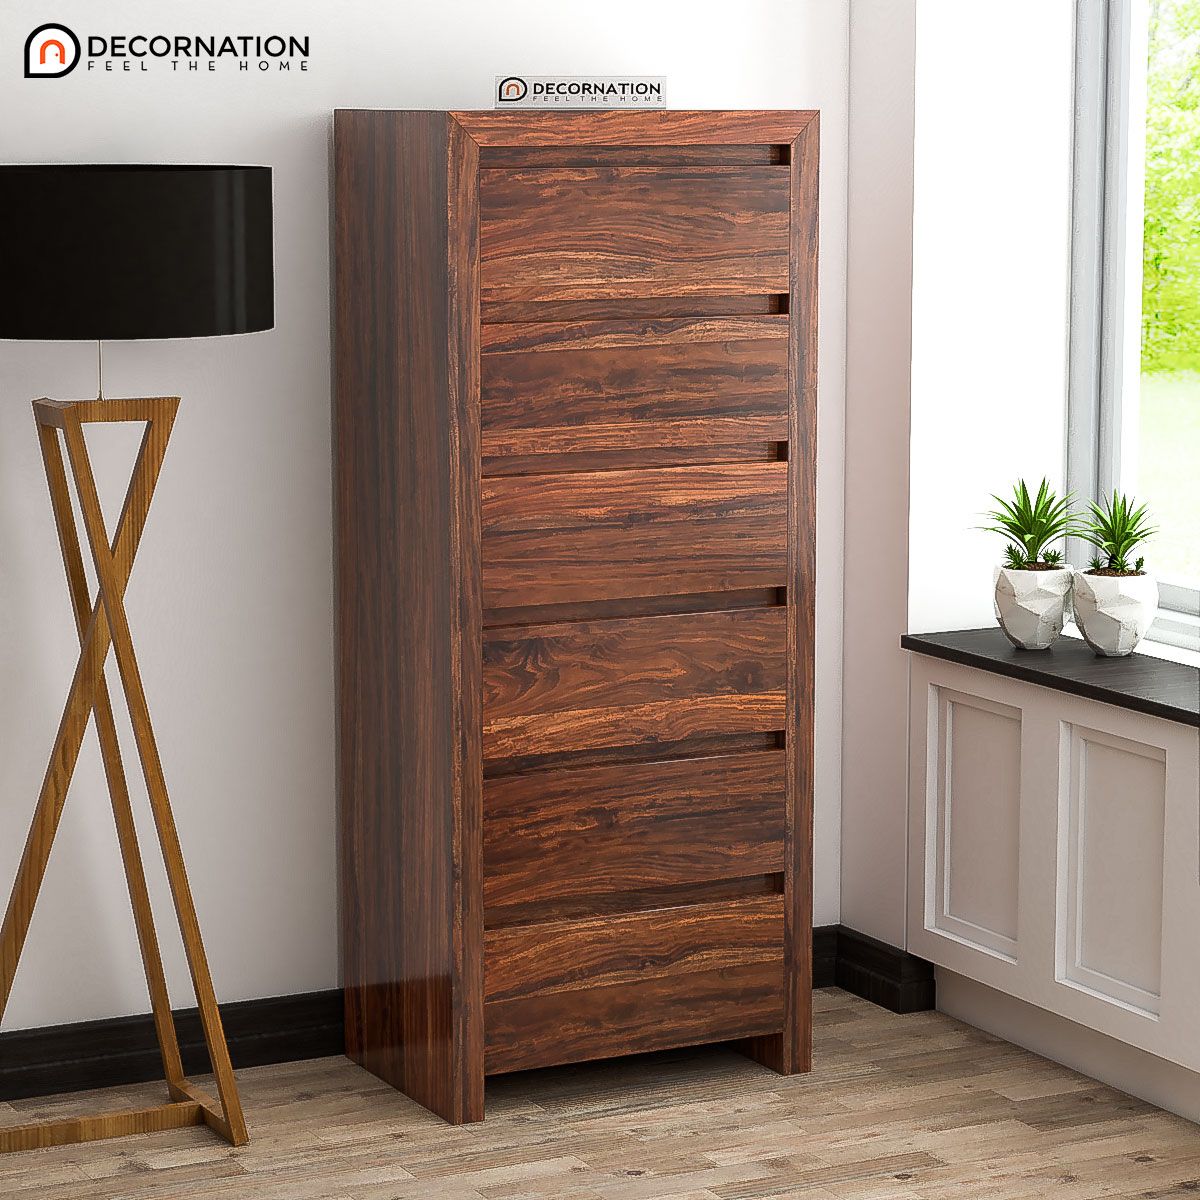 Adara Wooden Storage Cabinet – Natural Finish – Decornation With Regard To Wood Cabinet With Drawers (Photo 6 of 15)